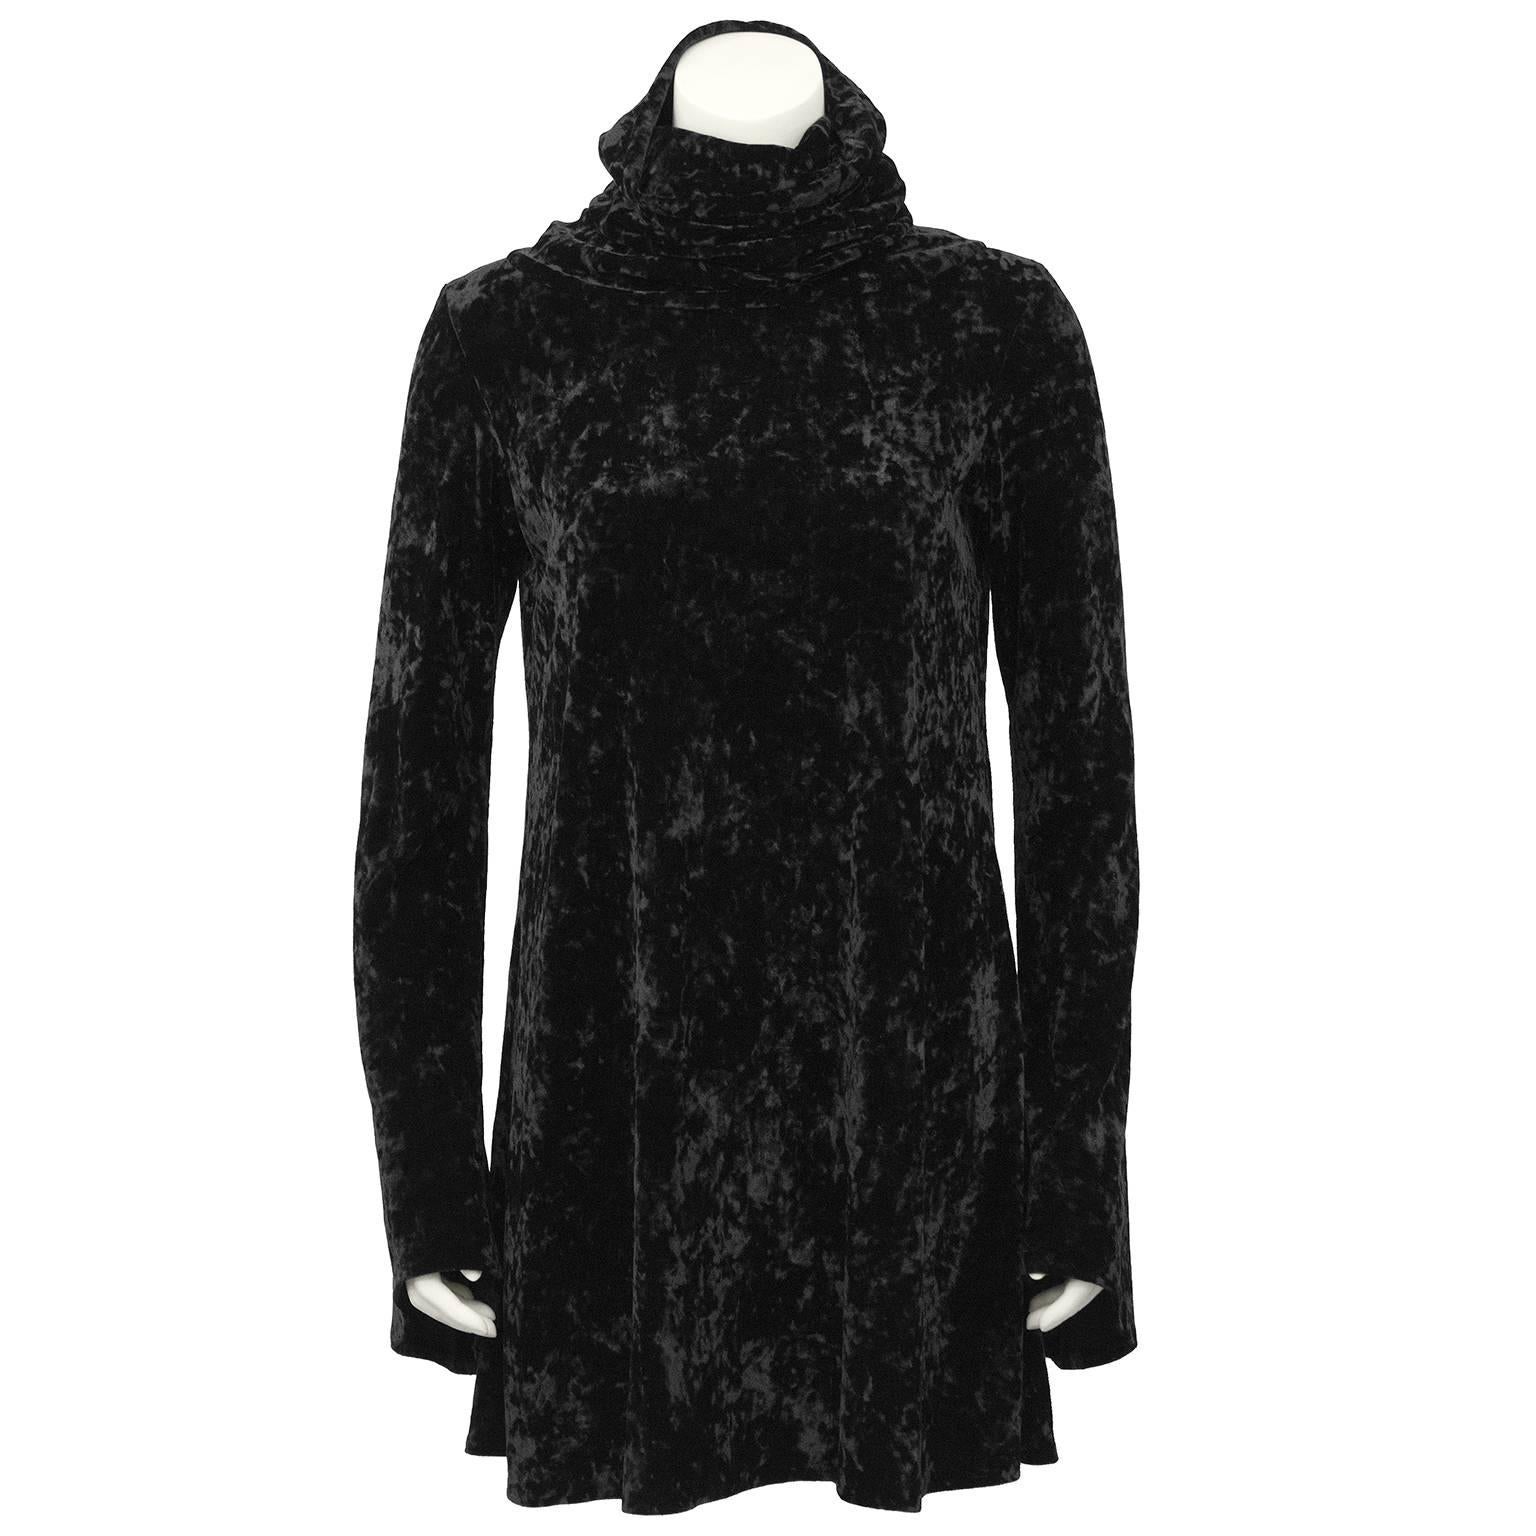 From  my personal archives this early 1990's 18008 Kamali panne velvet mini dress was the best piece from her fall collection. Versatile bell sleeve, high loose fit turtle neck, swing shape mini was paired originally with matching oversized bell